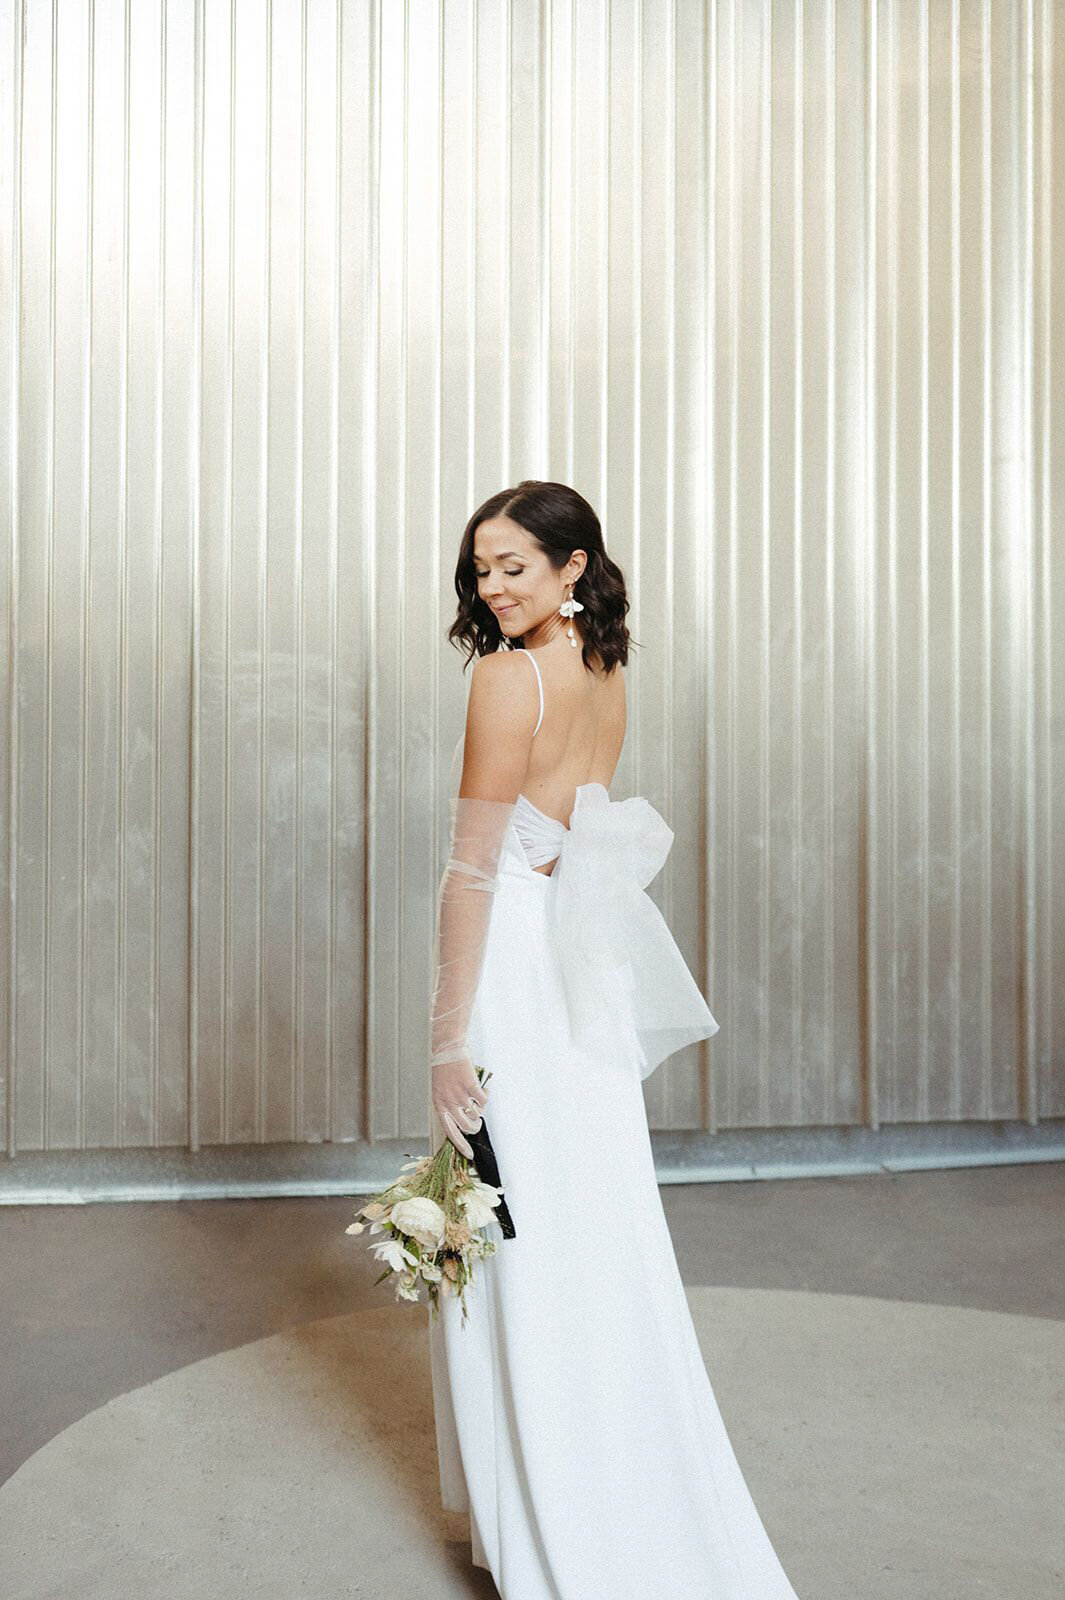 Stunning bridal portrait, coordinated by Coco & Ash, an intimate and modern wedding planner based in Calgary, Alberta.  Featured on the Brontë Bride Vendor Guide.